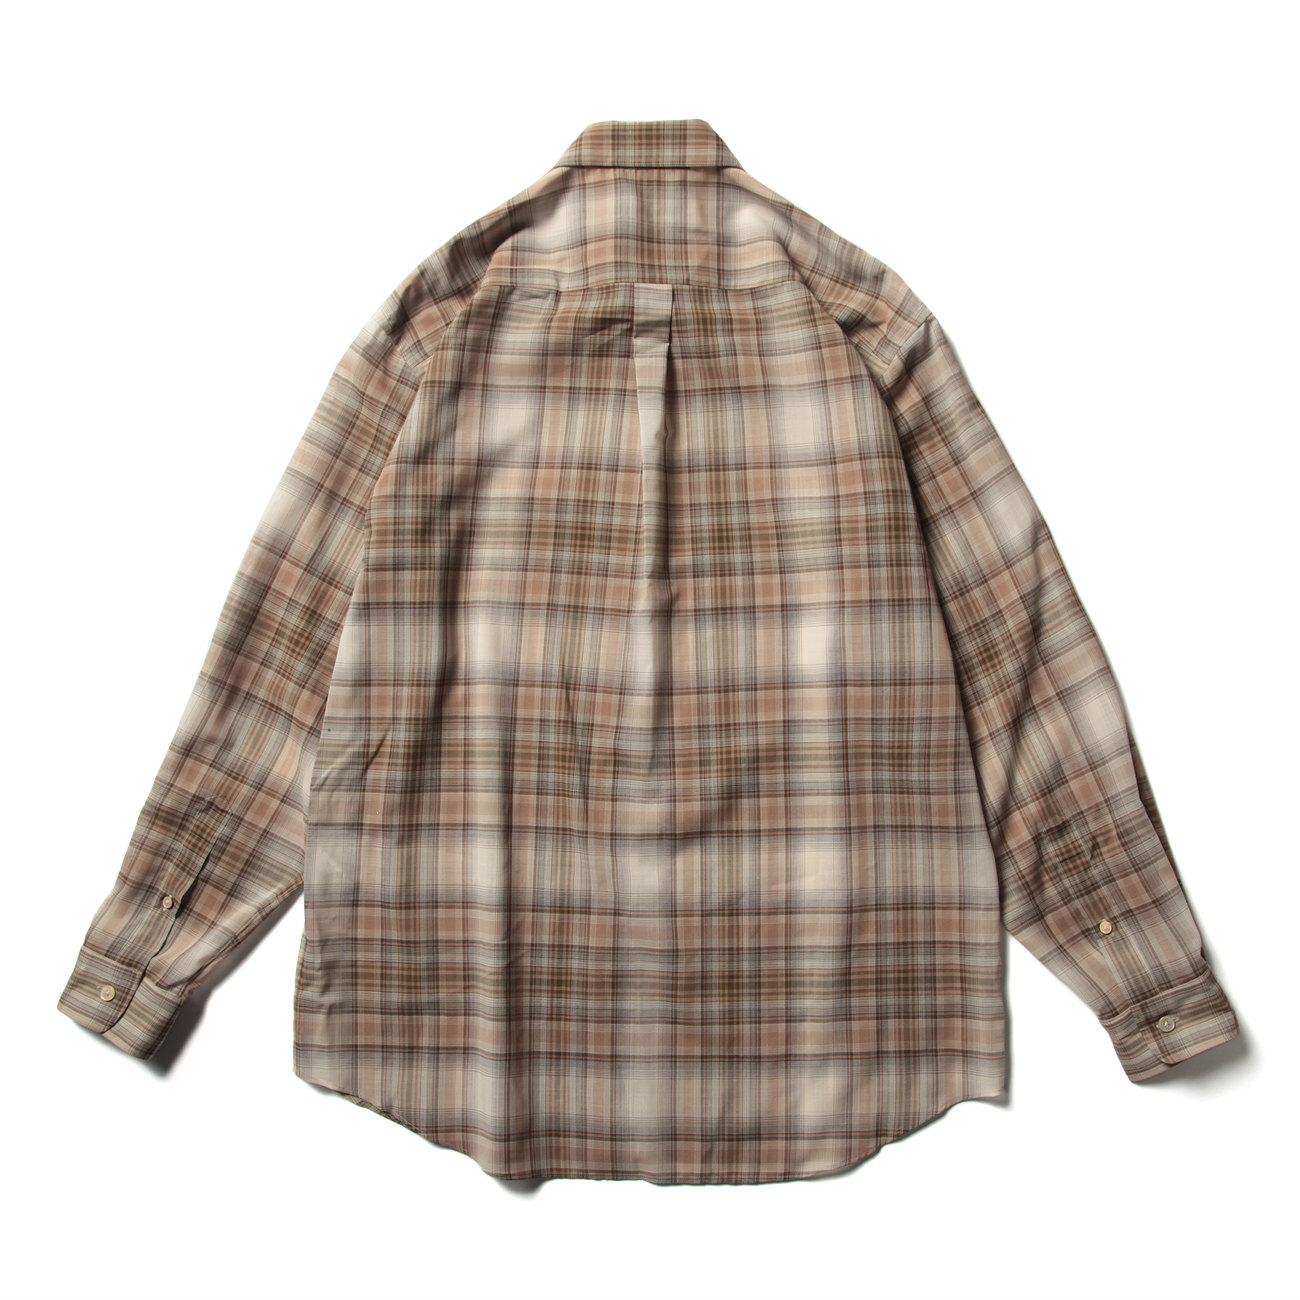 WOOL RECYCLED POLYESTER CLOTH SHIRTS - Beige Check